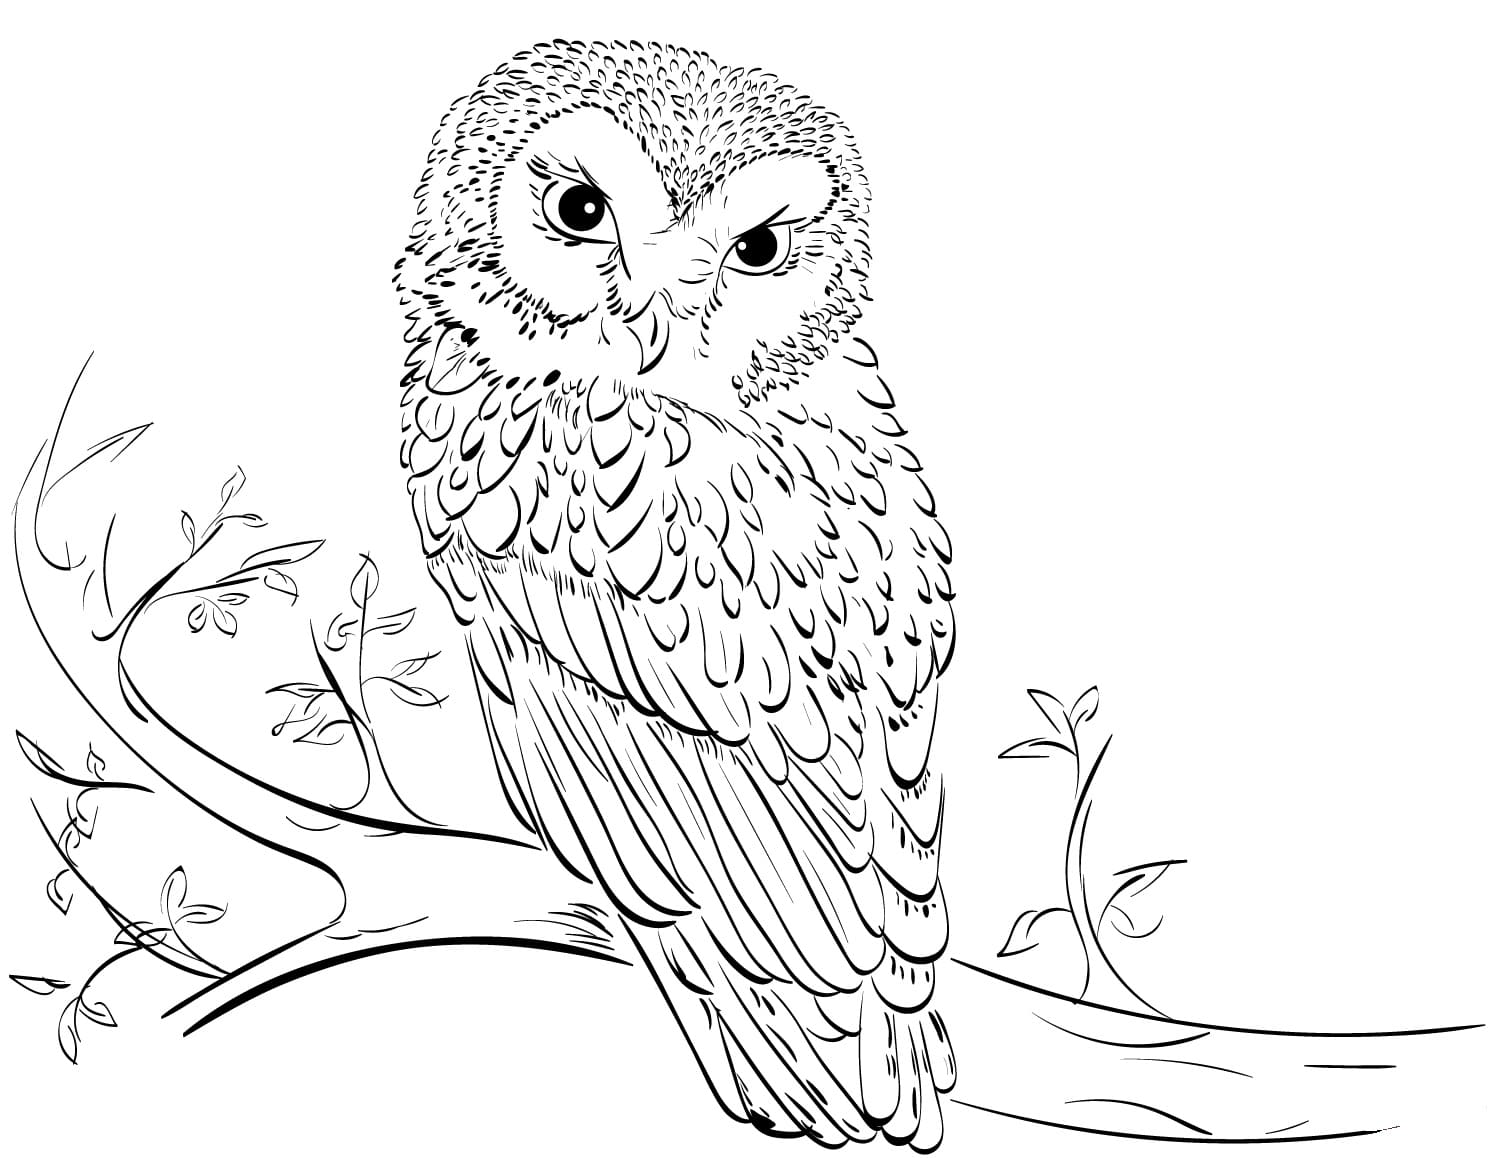 Owl Coloring Pages. 21 Birds of prey pictures for free